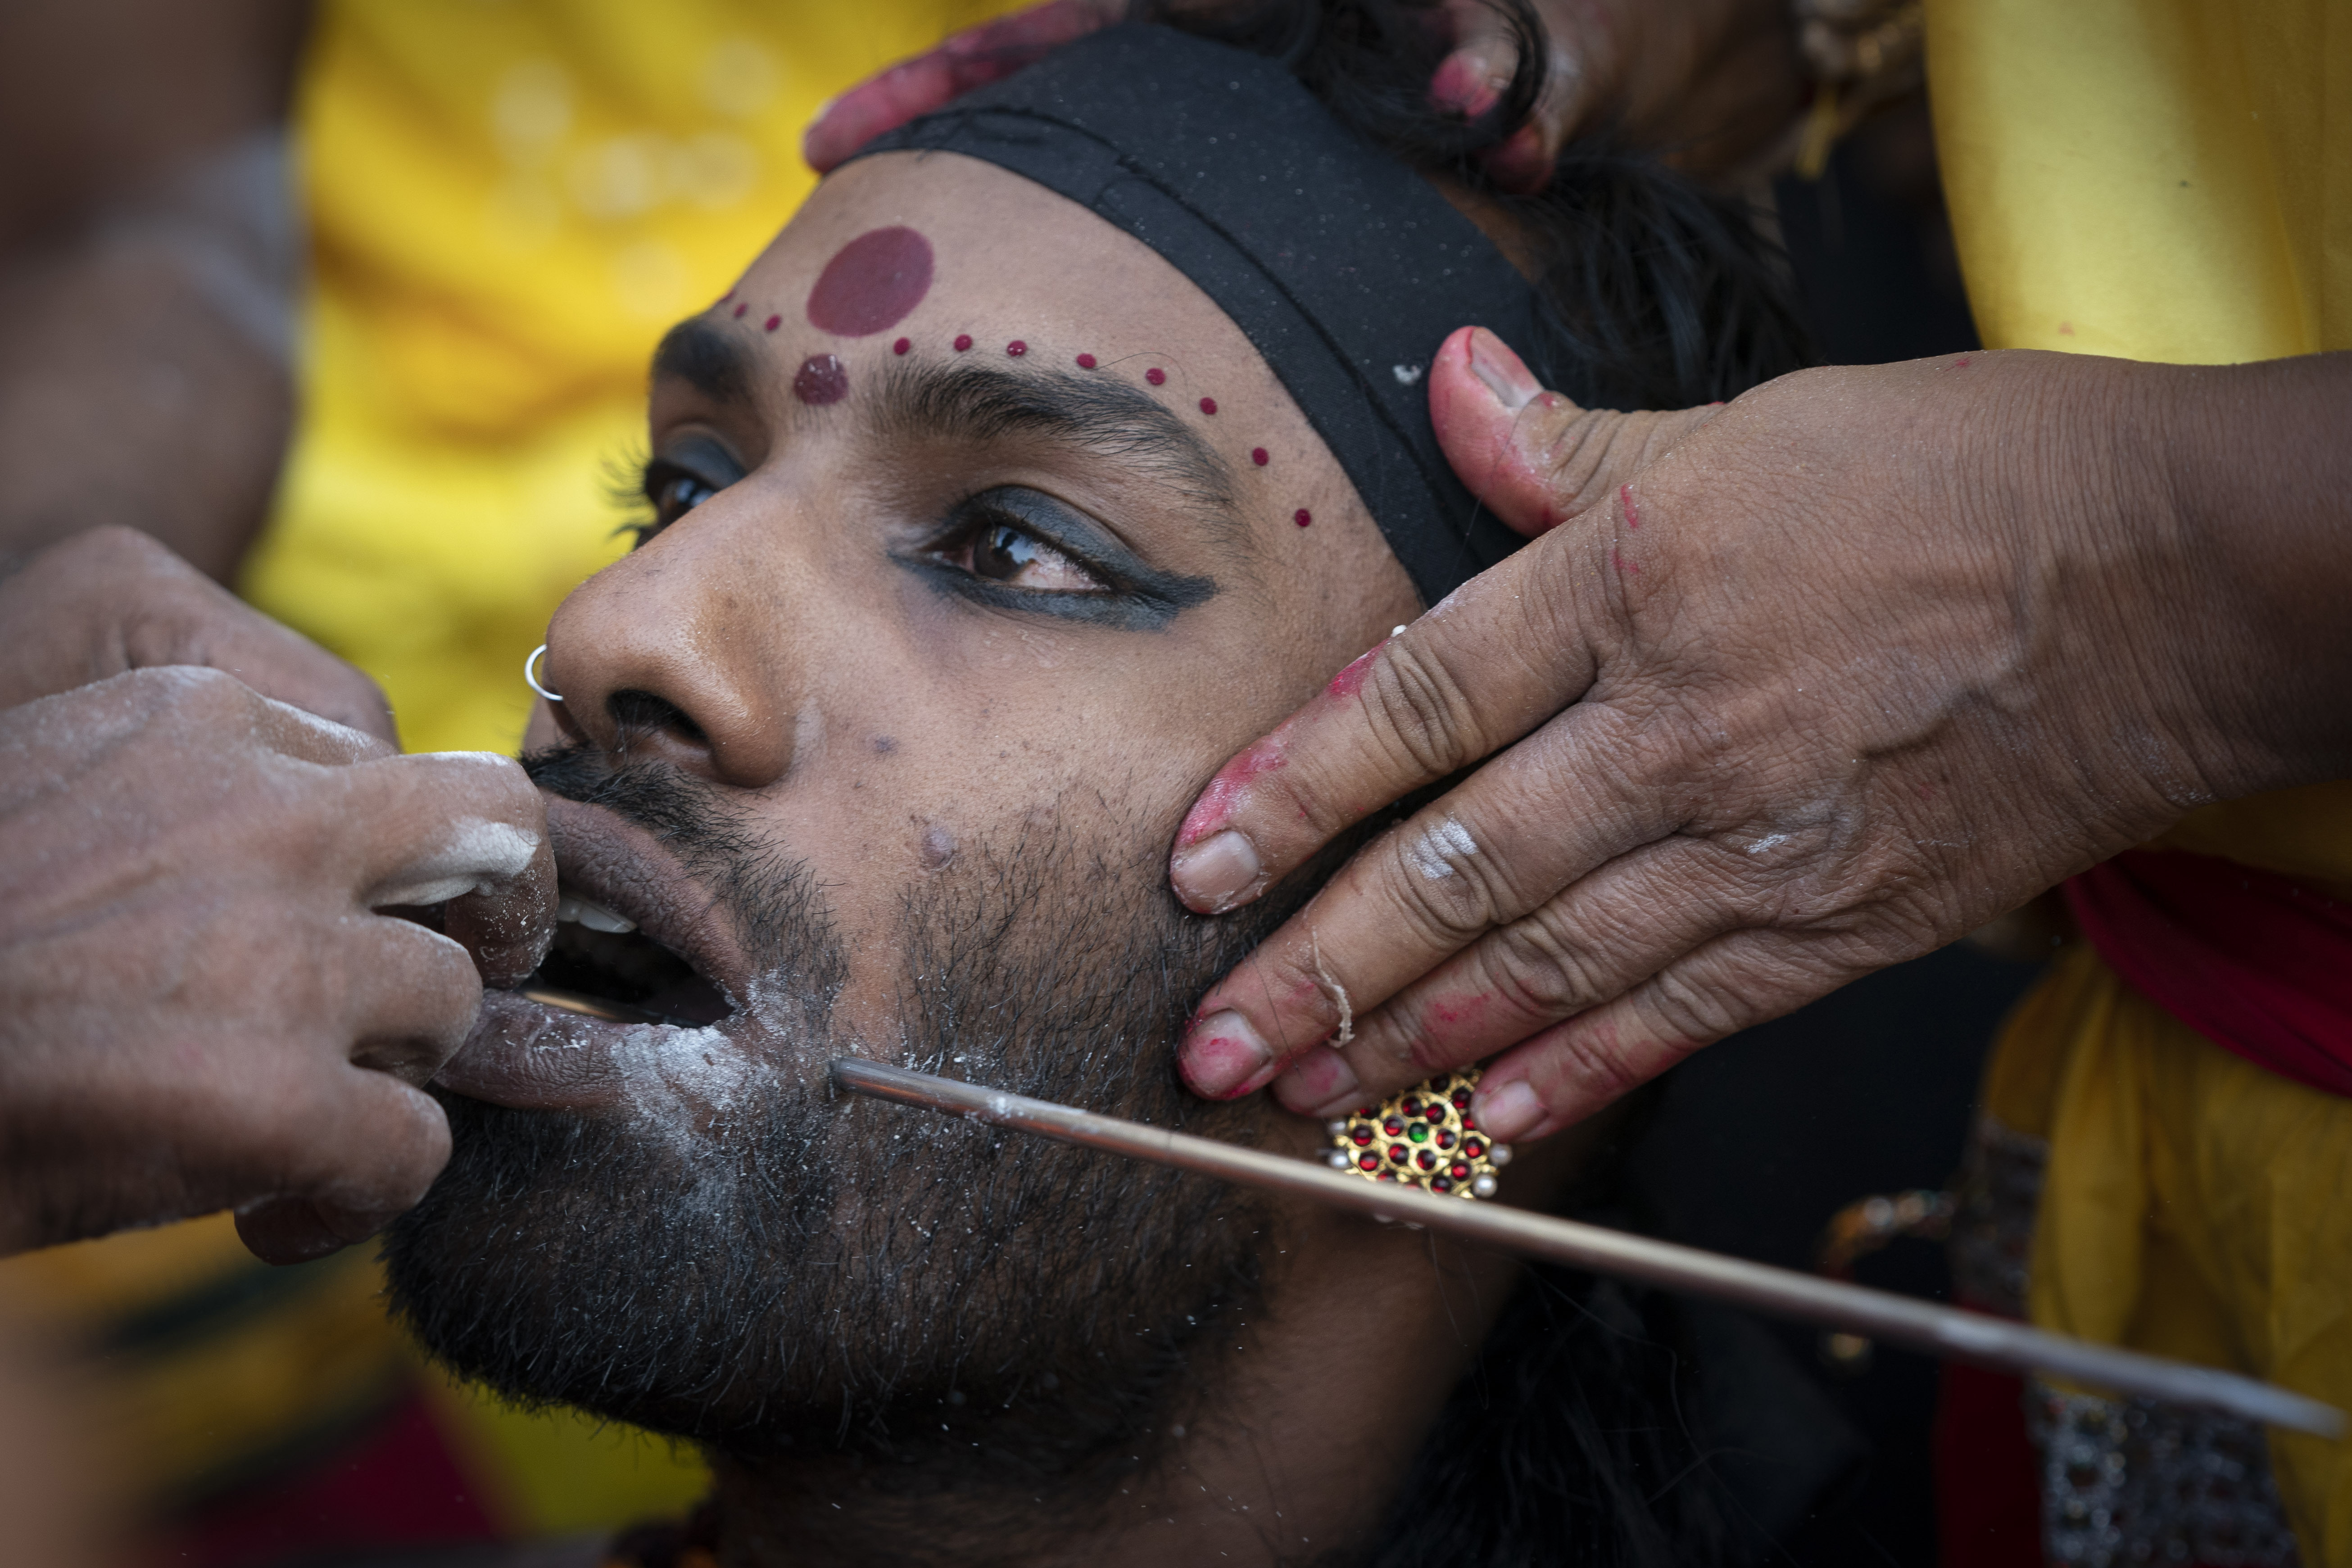 A Hindu devotee gets his tongue pierced with a metal rod during the Thaipusam festival at Batu Caves, outskirts of Kuala Lumpur, Saturday, Feb. 8, 2020. Thaipusam, which is celebrated in honor of Hindu god Lord Murugan, is an annual procession by Hindu devotees seeking blessings, fulfilling vows and offering thanks. (AP Photo/Vincent Thian)